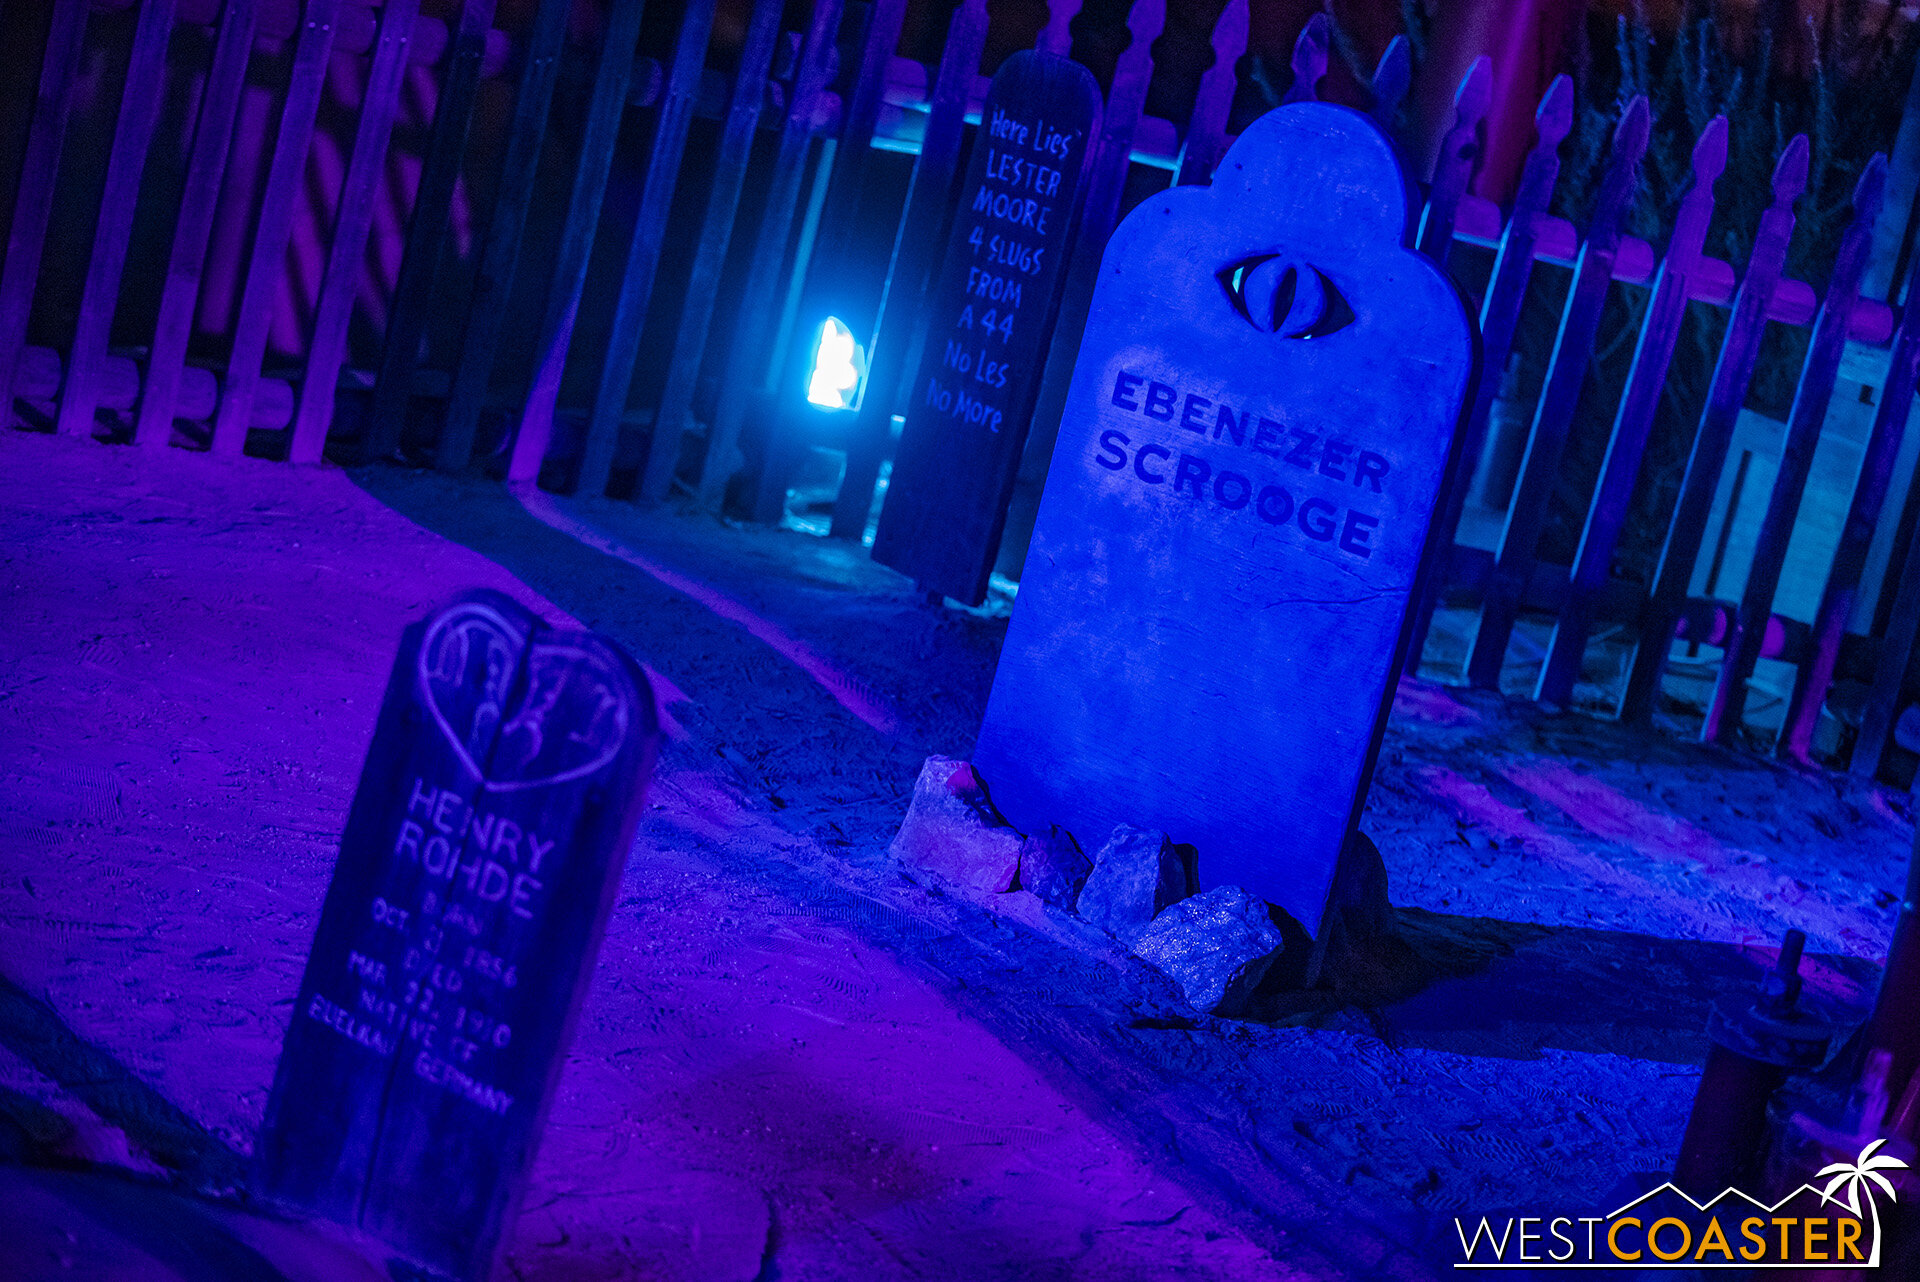  Scrooge’s tombstone is illuminated for him to see, and it seems to inspire a change of heart. 